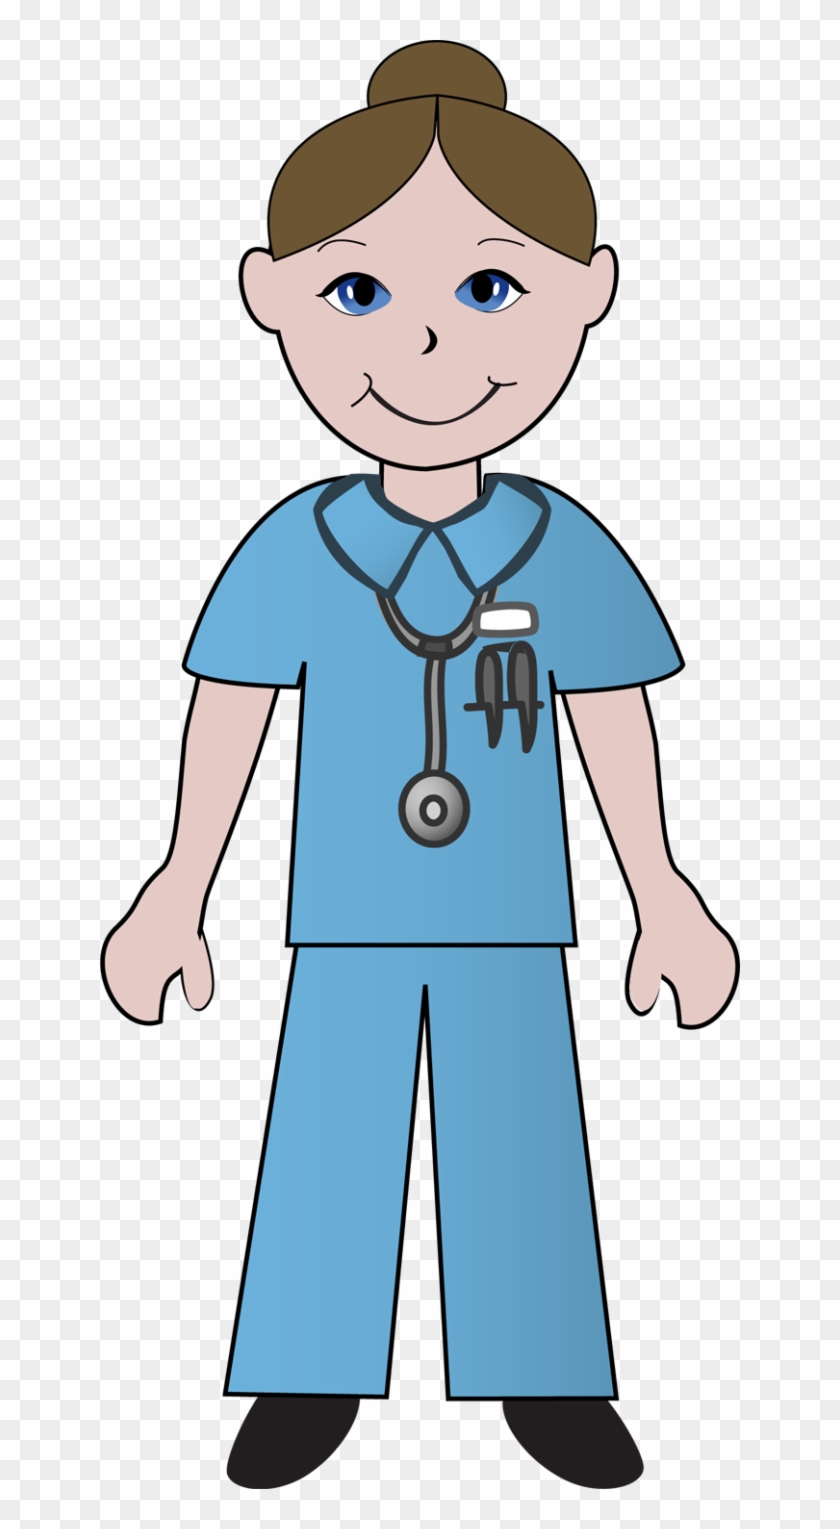 Clipart Of Doctor, Nursing And Physician - Clip Art #835026